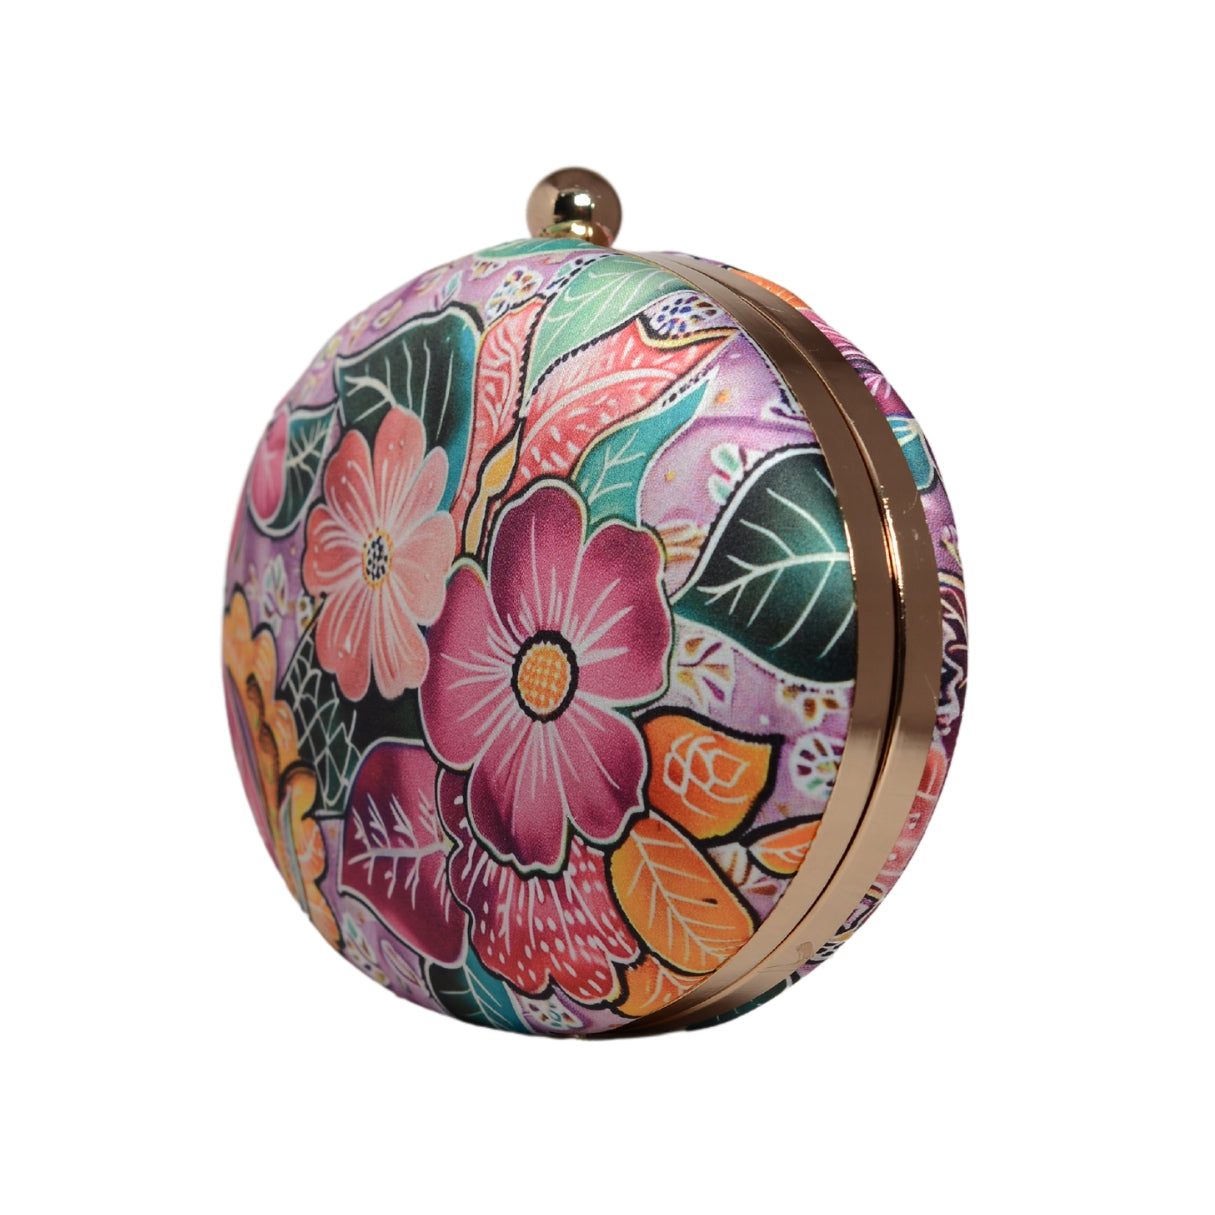 Pink Floral Printed Oval Clutch